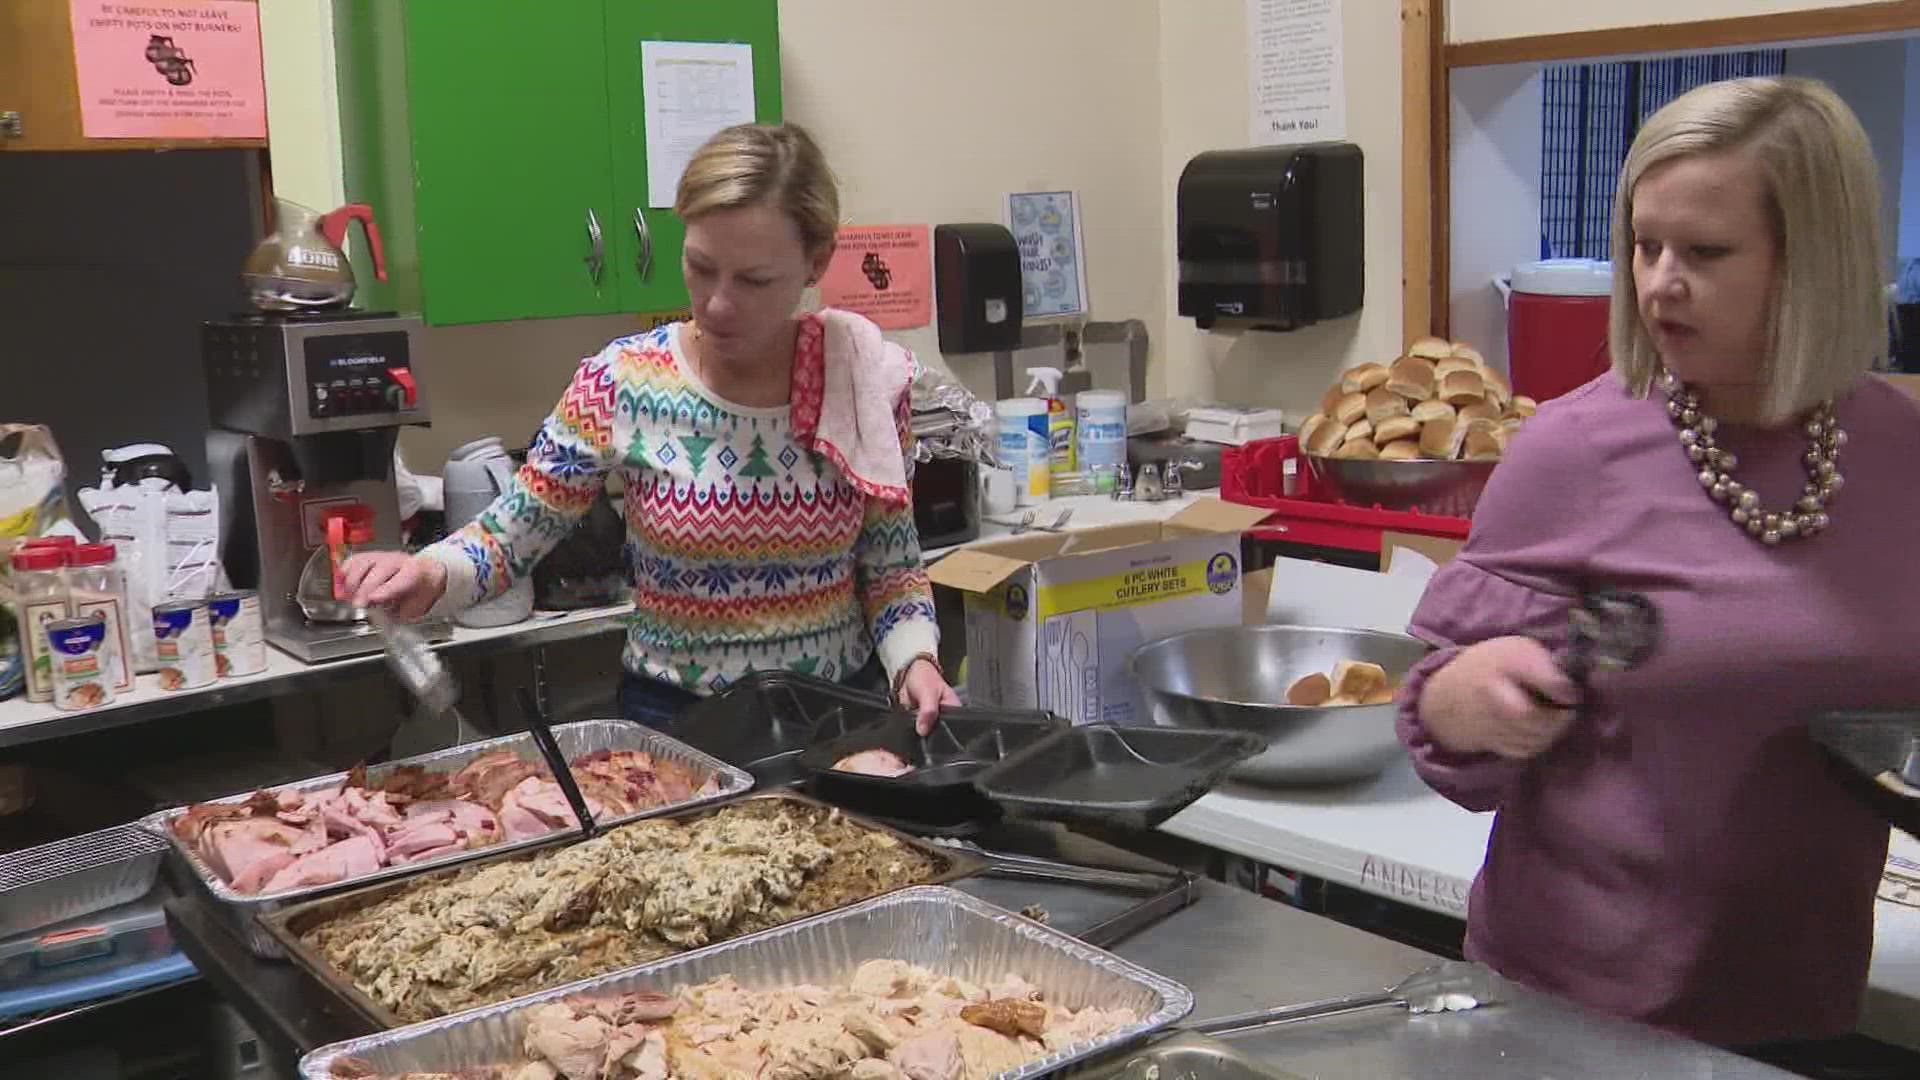 "We believe no one should be alone on Thanksgiving." Pride STL gave out hundreds of meals to help the community.